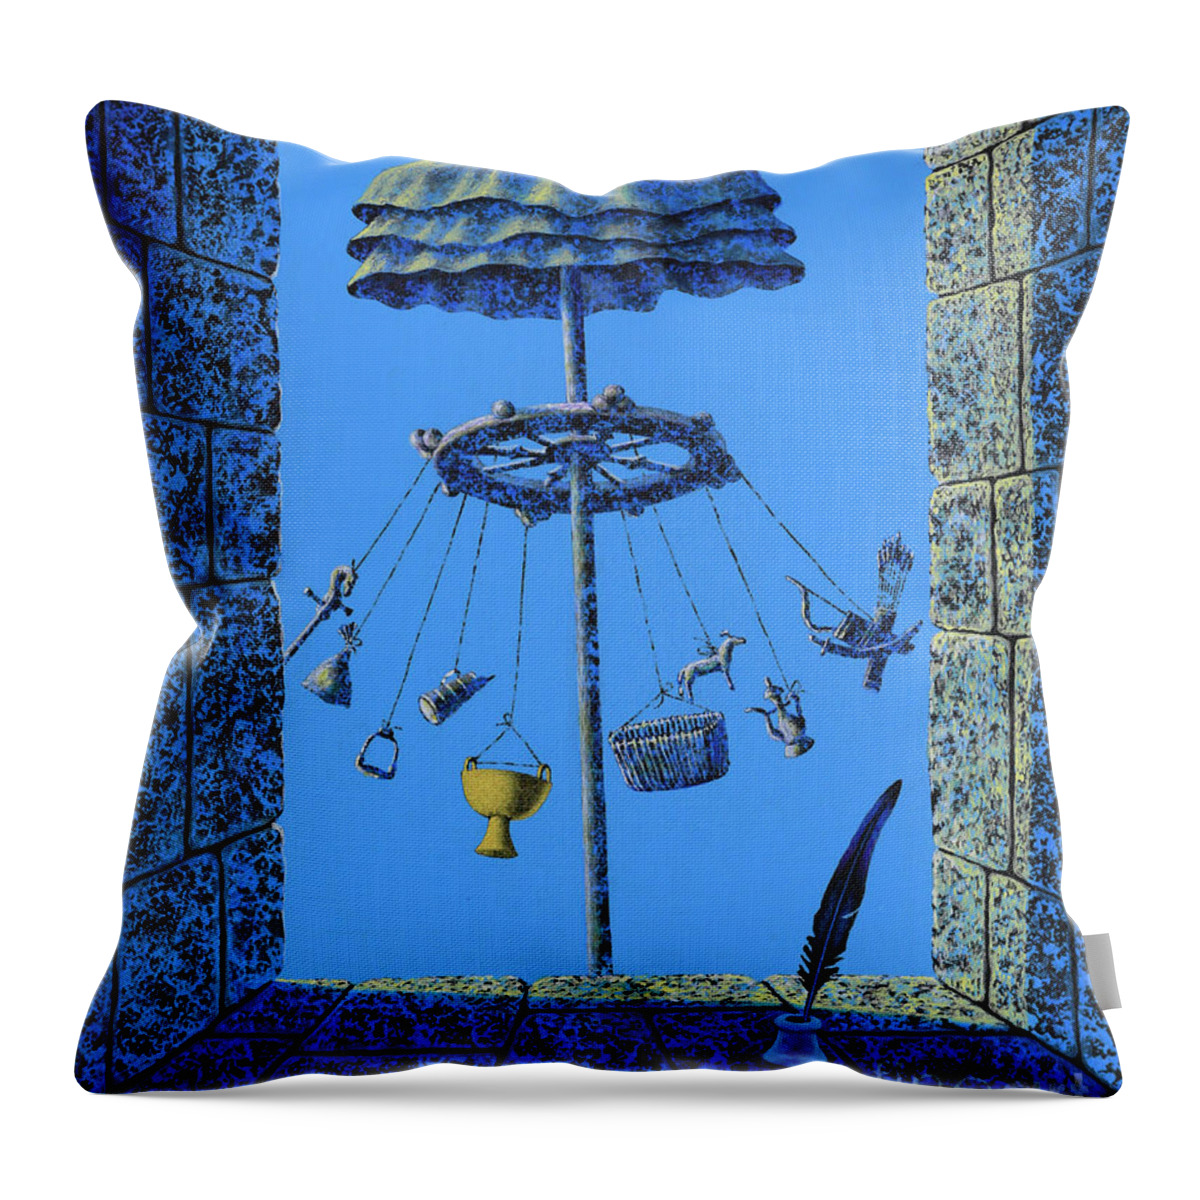 Oil On Canvas Throw Pillow featuring the painting Bet by Oilan Janatkhaan